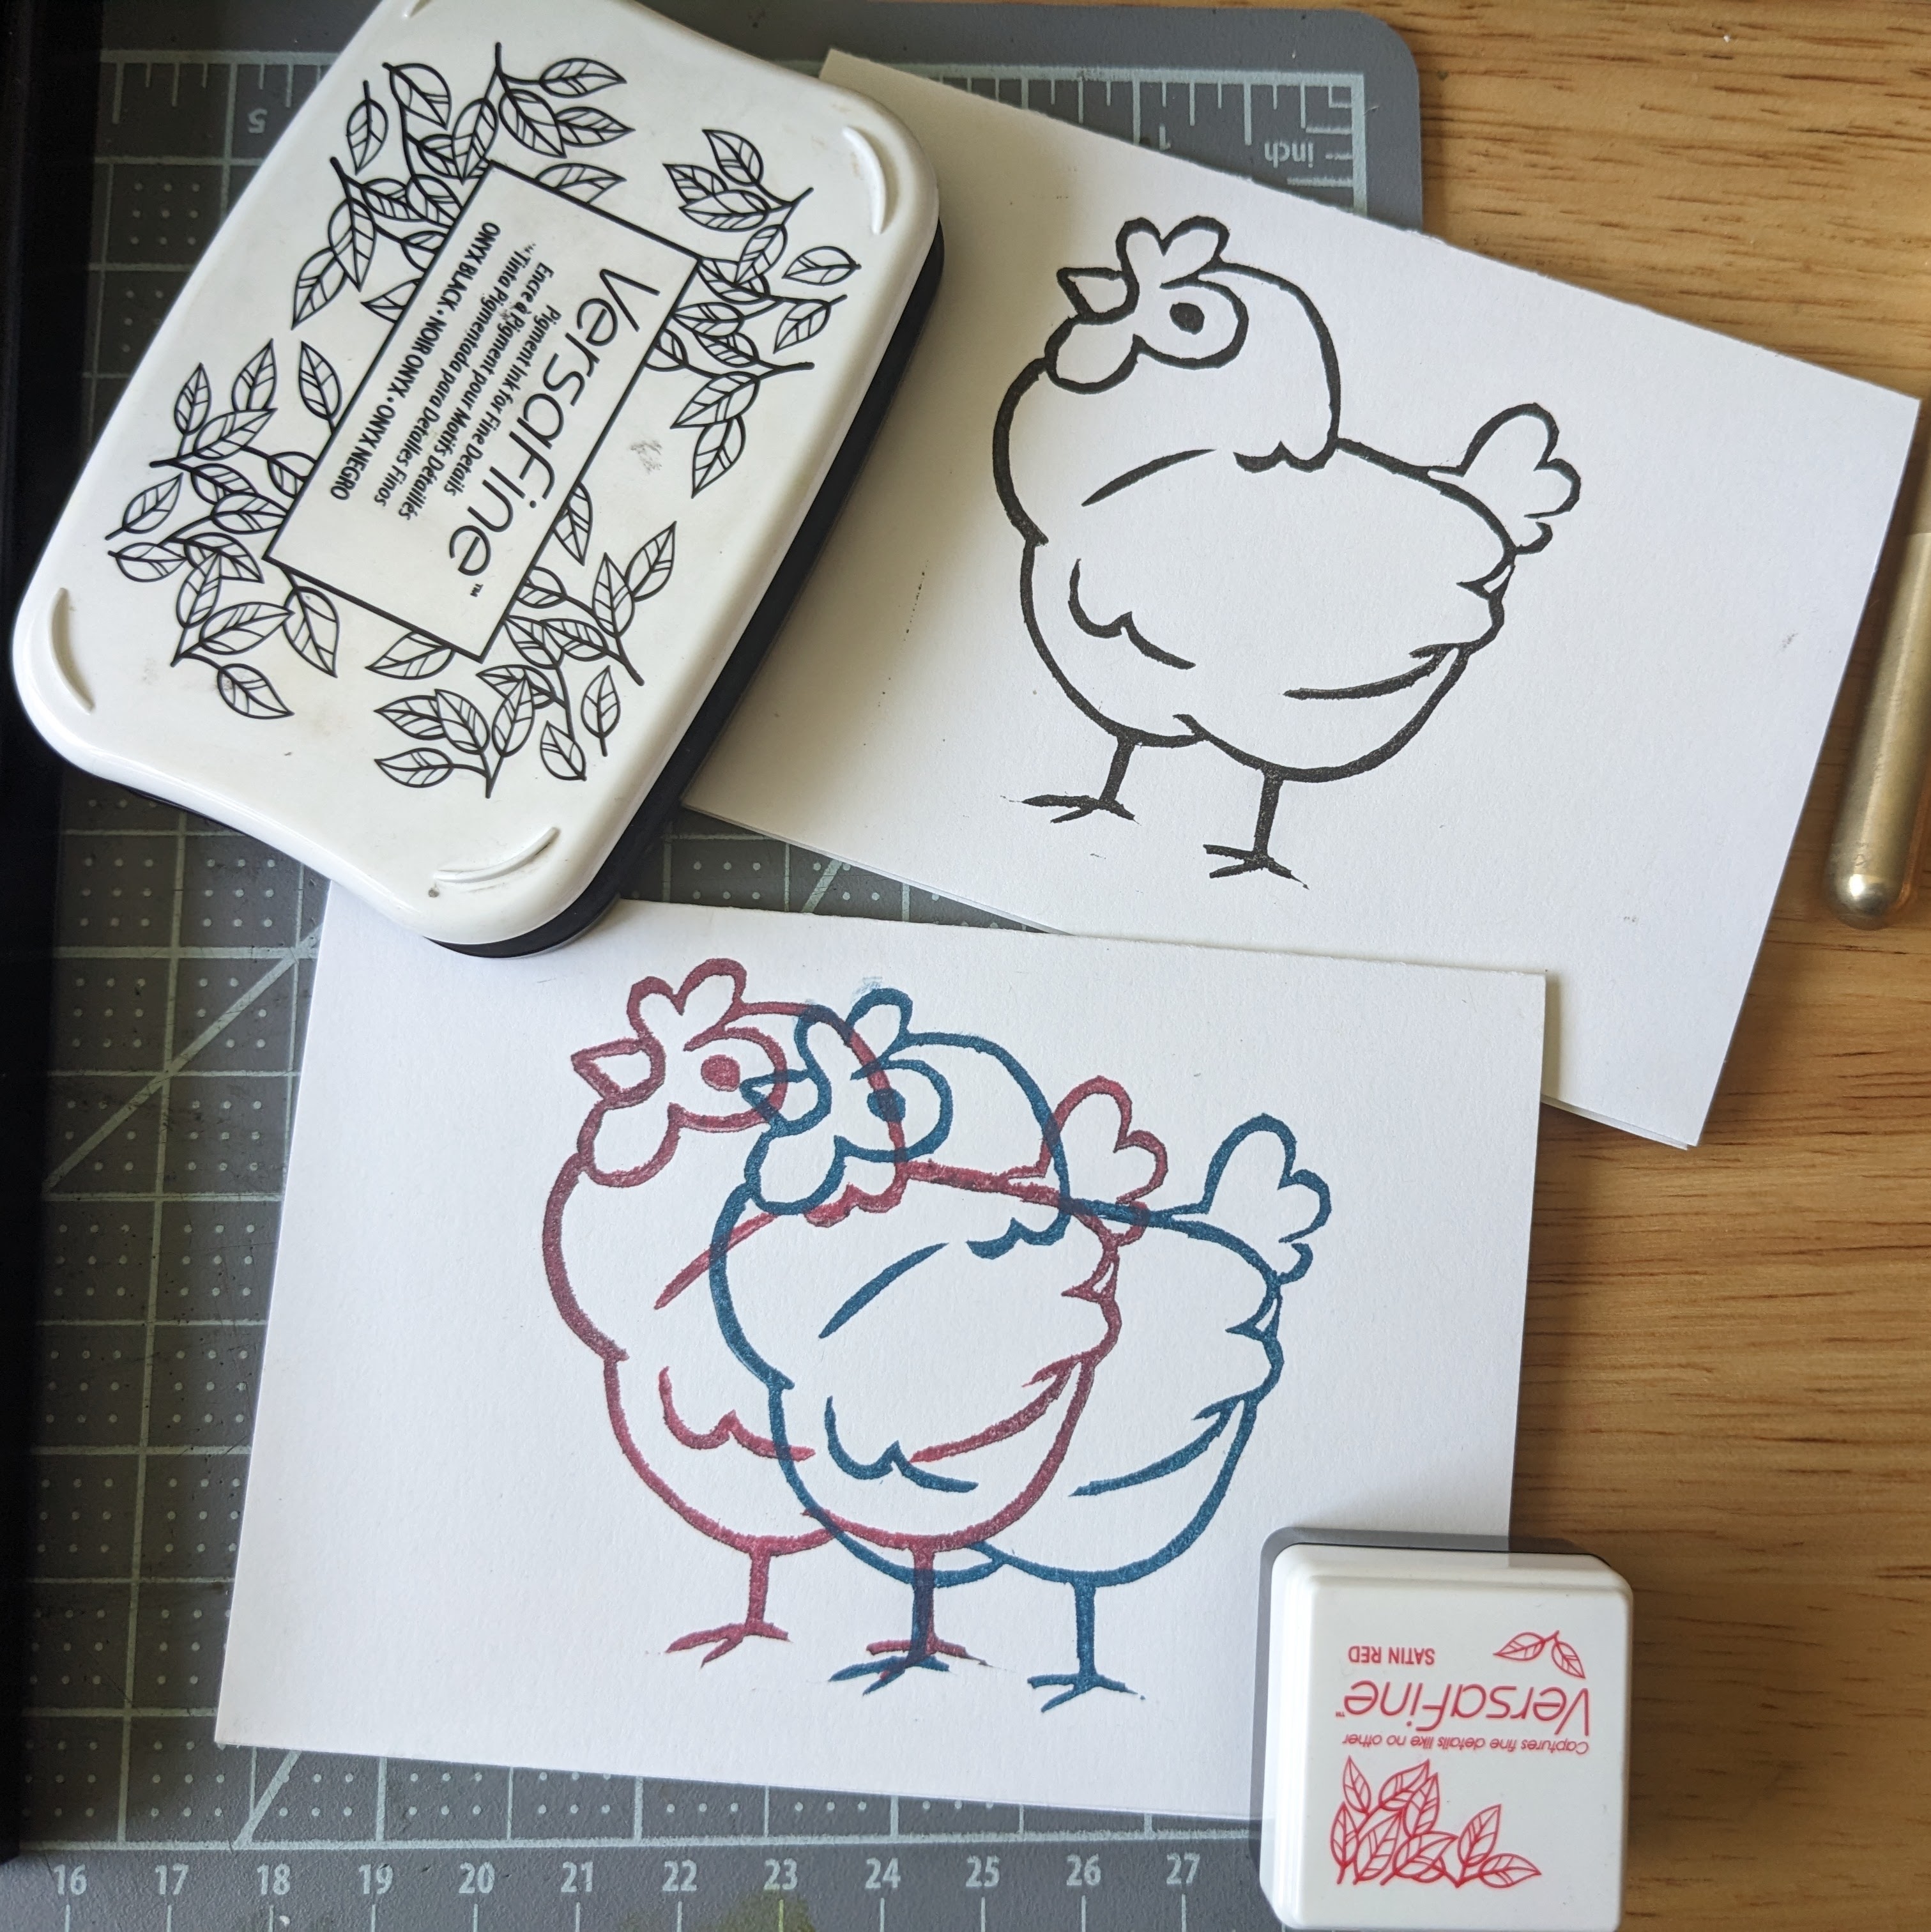 2 white greeting cards with the Artisans Cooperative logo, a chicken. One card has a single print of the chicken in black ink, and the other has two overlapping prints in blue and red ink